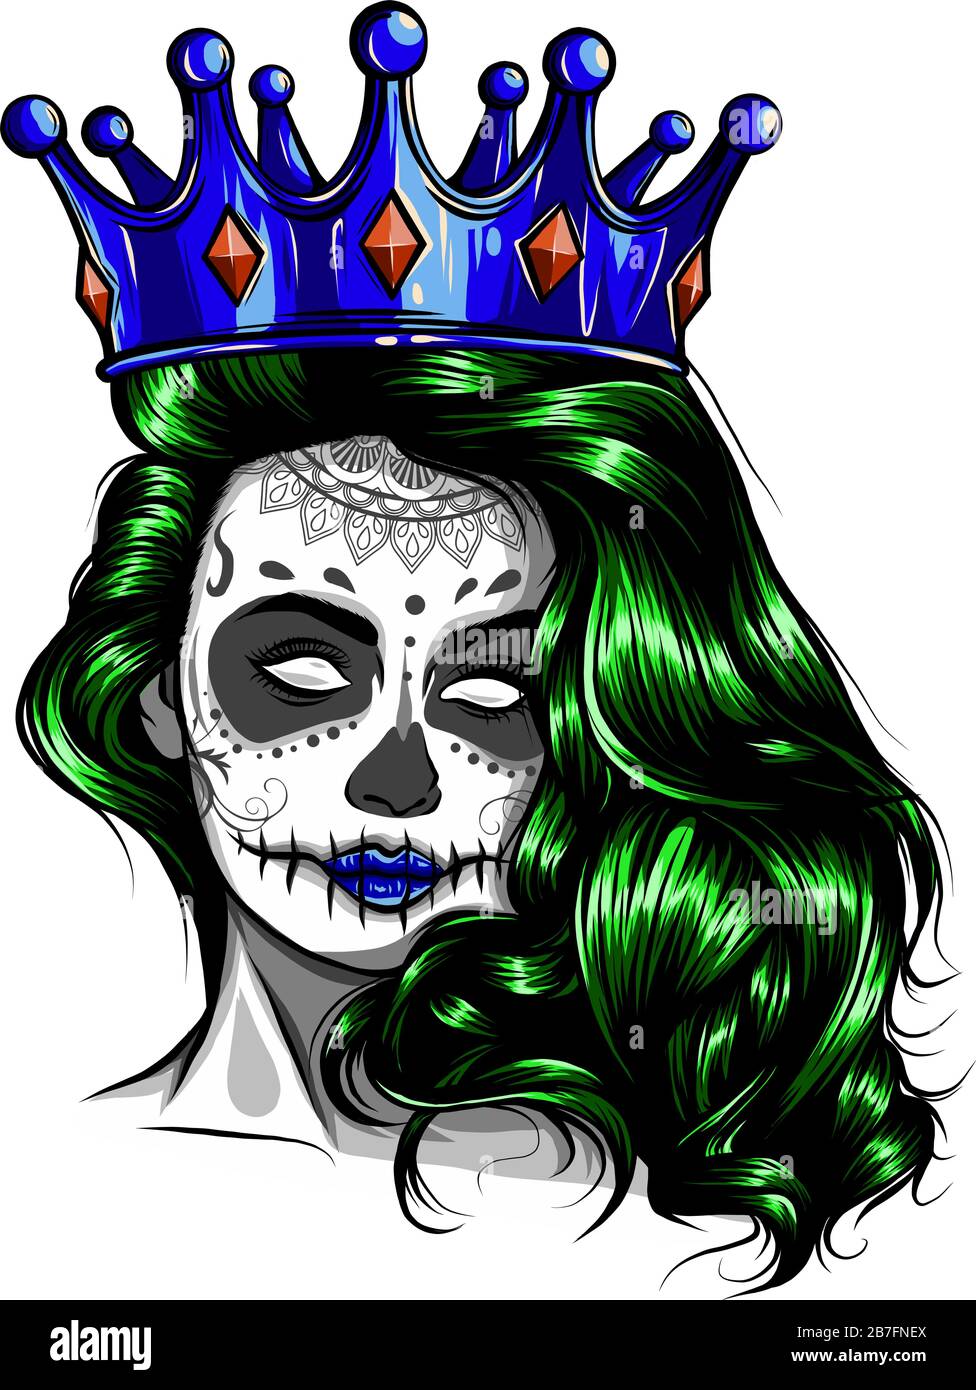 Female skull with a crown and long hair. Queen of death drawn in tattoo style. Vector illustration. Stock Vector